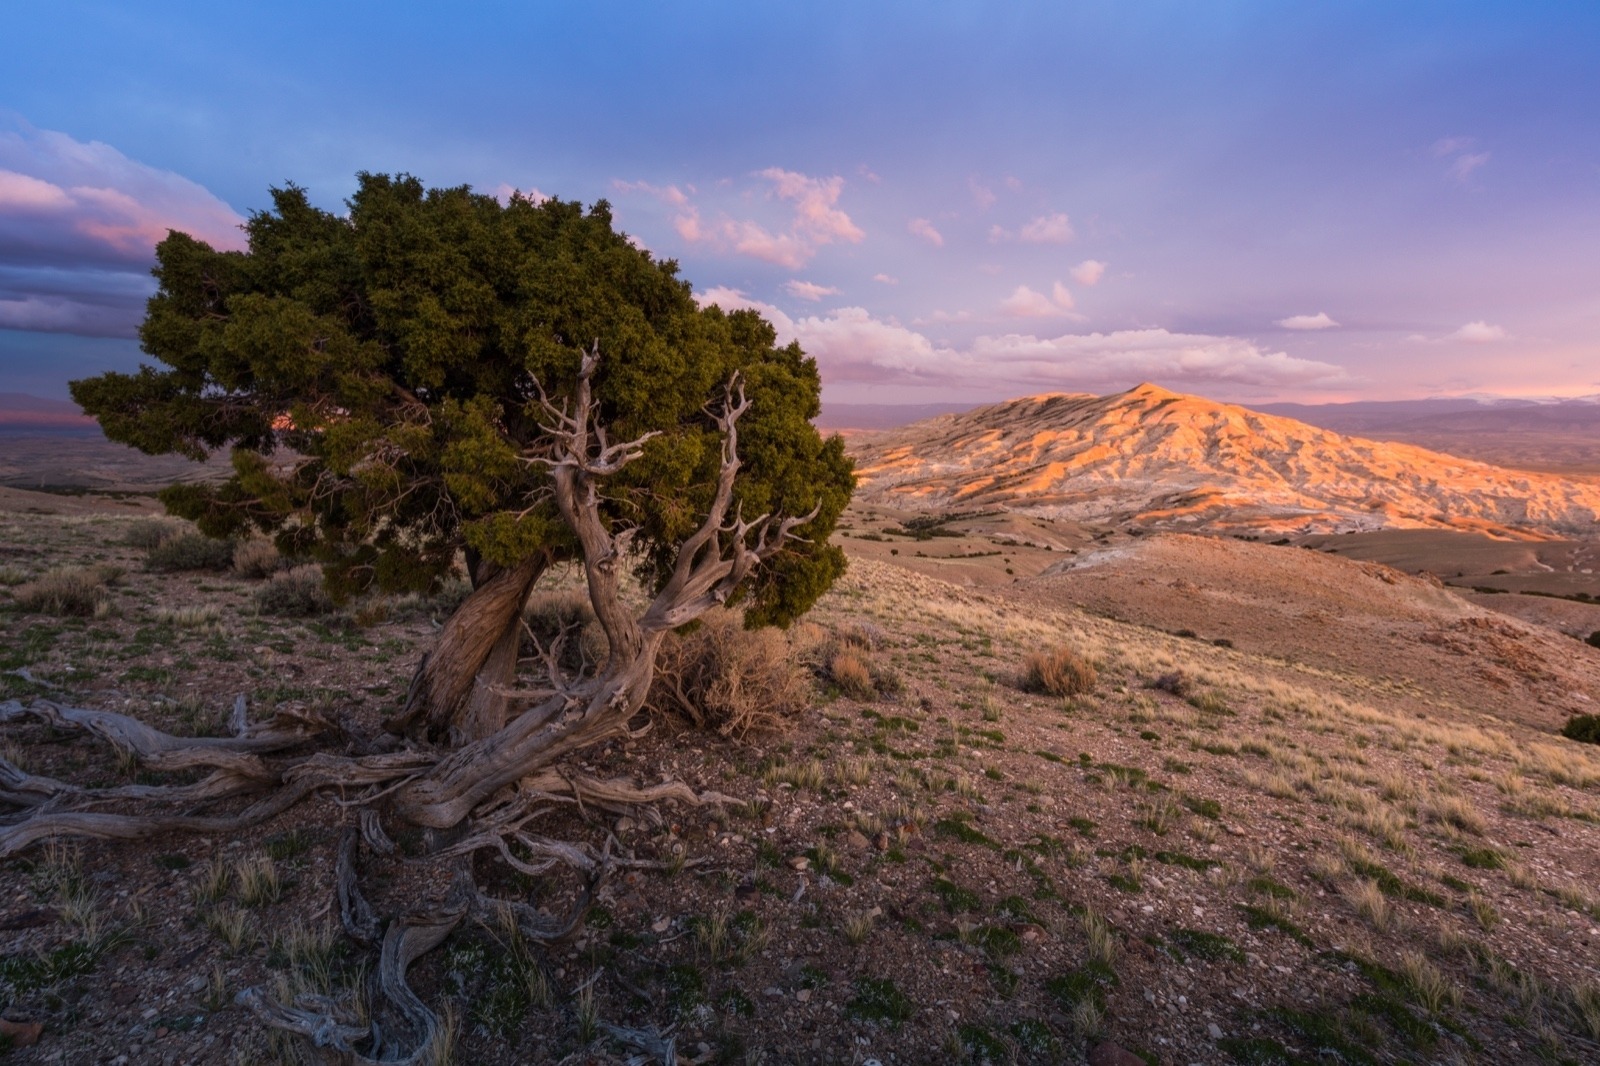 Twin Buttes Wilderness Study Area astride of the Devils Playground WSA in Wyoming. Photo courtesy Nicolaus Wegner